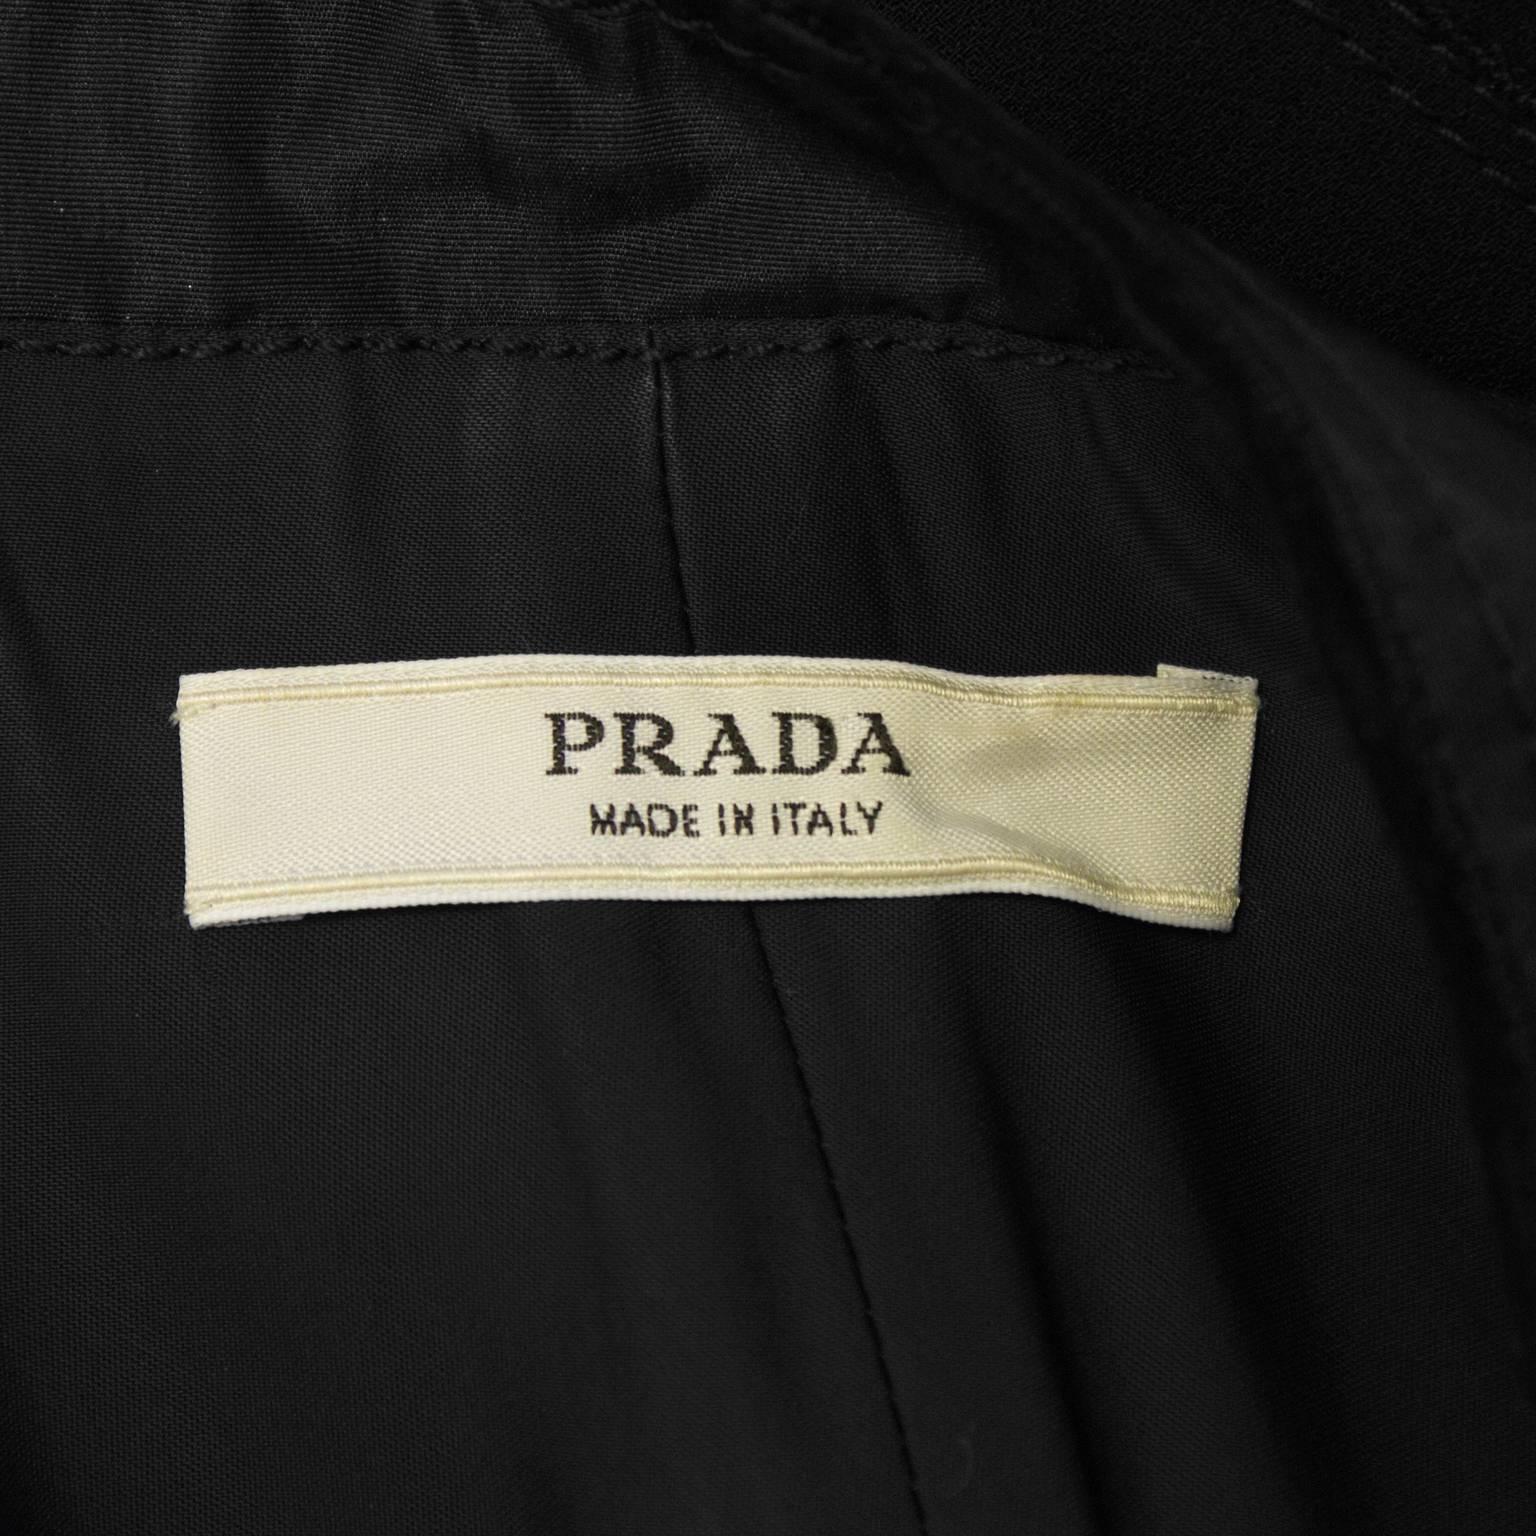 2000's Prada Black Jacket with Rhinestone Flowers  In Excellent Condition For Sale In Toronto, Ontario